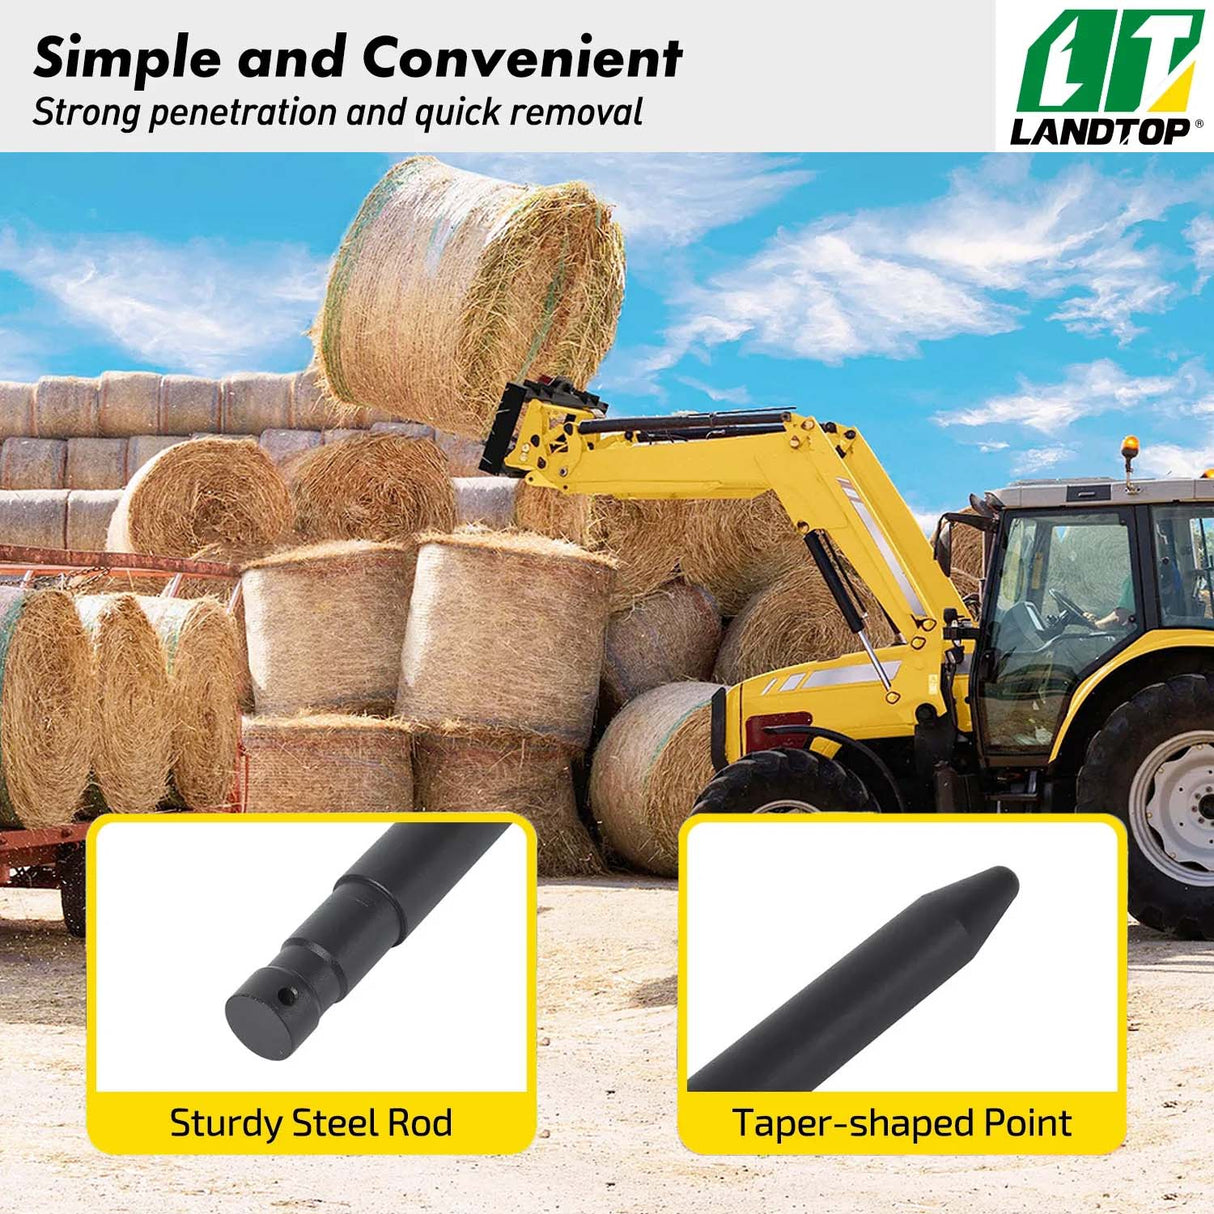 17" Stabilizer Hay Bale Spear Attachment, Pair Quick Attach Bale Spike with Sleeves, Black Powder Coated Hay Bale Forks Handing Equipment Fit for for Skid Steer Mount Plate Tractors Loaders